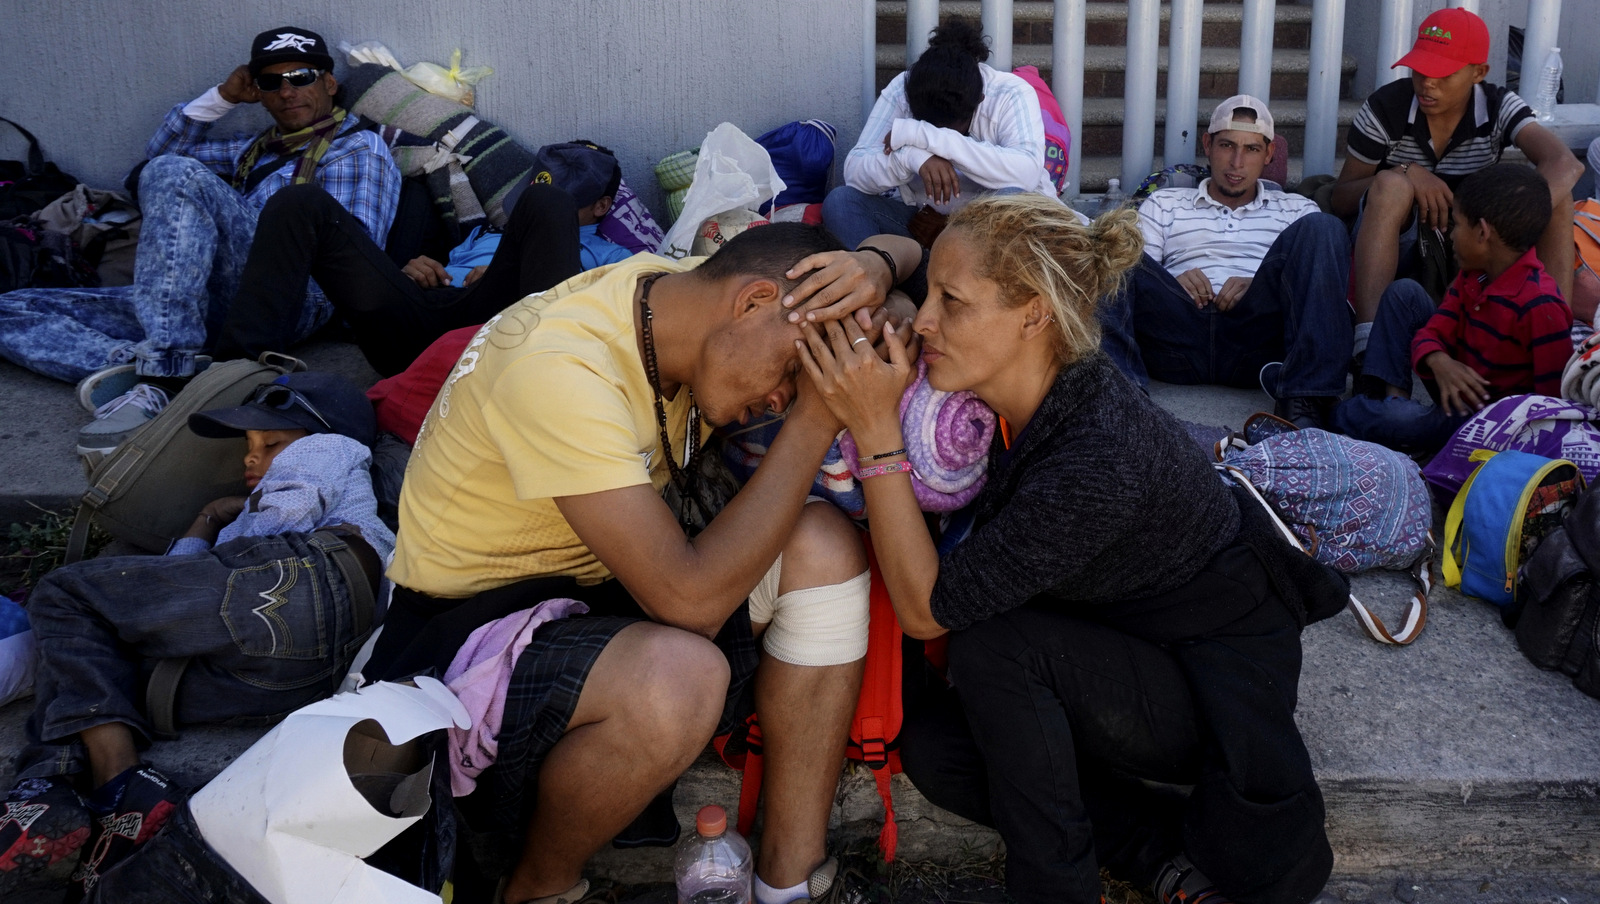 Central American migrants who attended the annual Migrants Stations of the Cross caravan for migrants' rights, rest at a shelter in Tlaquepaque, Jalisco state, Mexico, April 18, 2018. The remnants of the migrant caravan that drew the ire of President Donald Trump were continuing their journey north through Mexico toward the U.S. border. (AP/Refugio Ruiz)